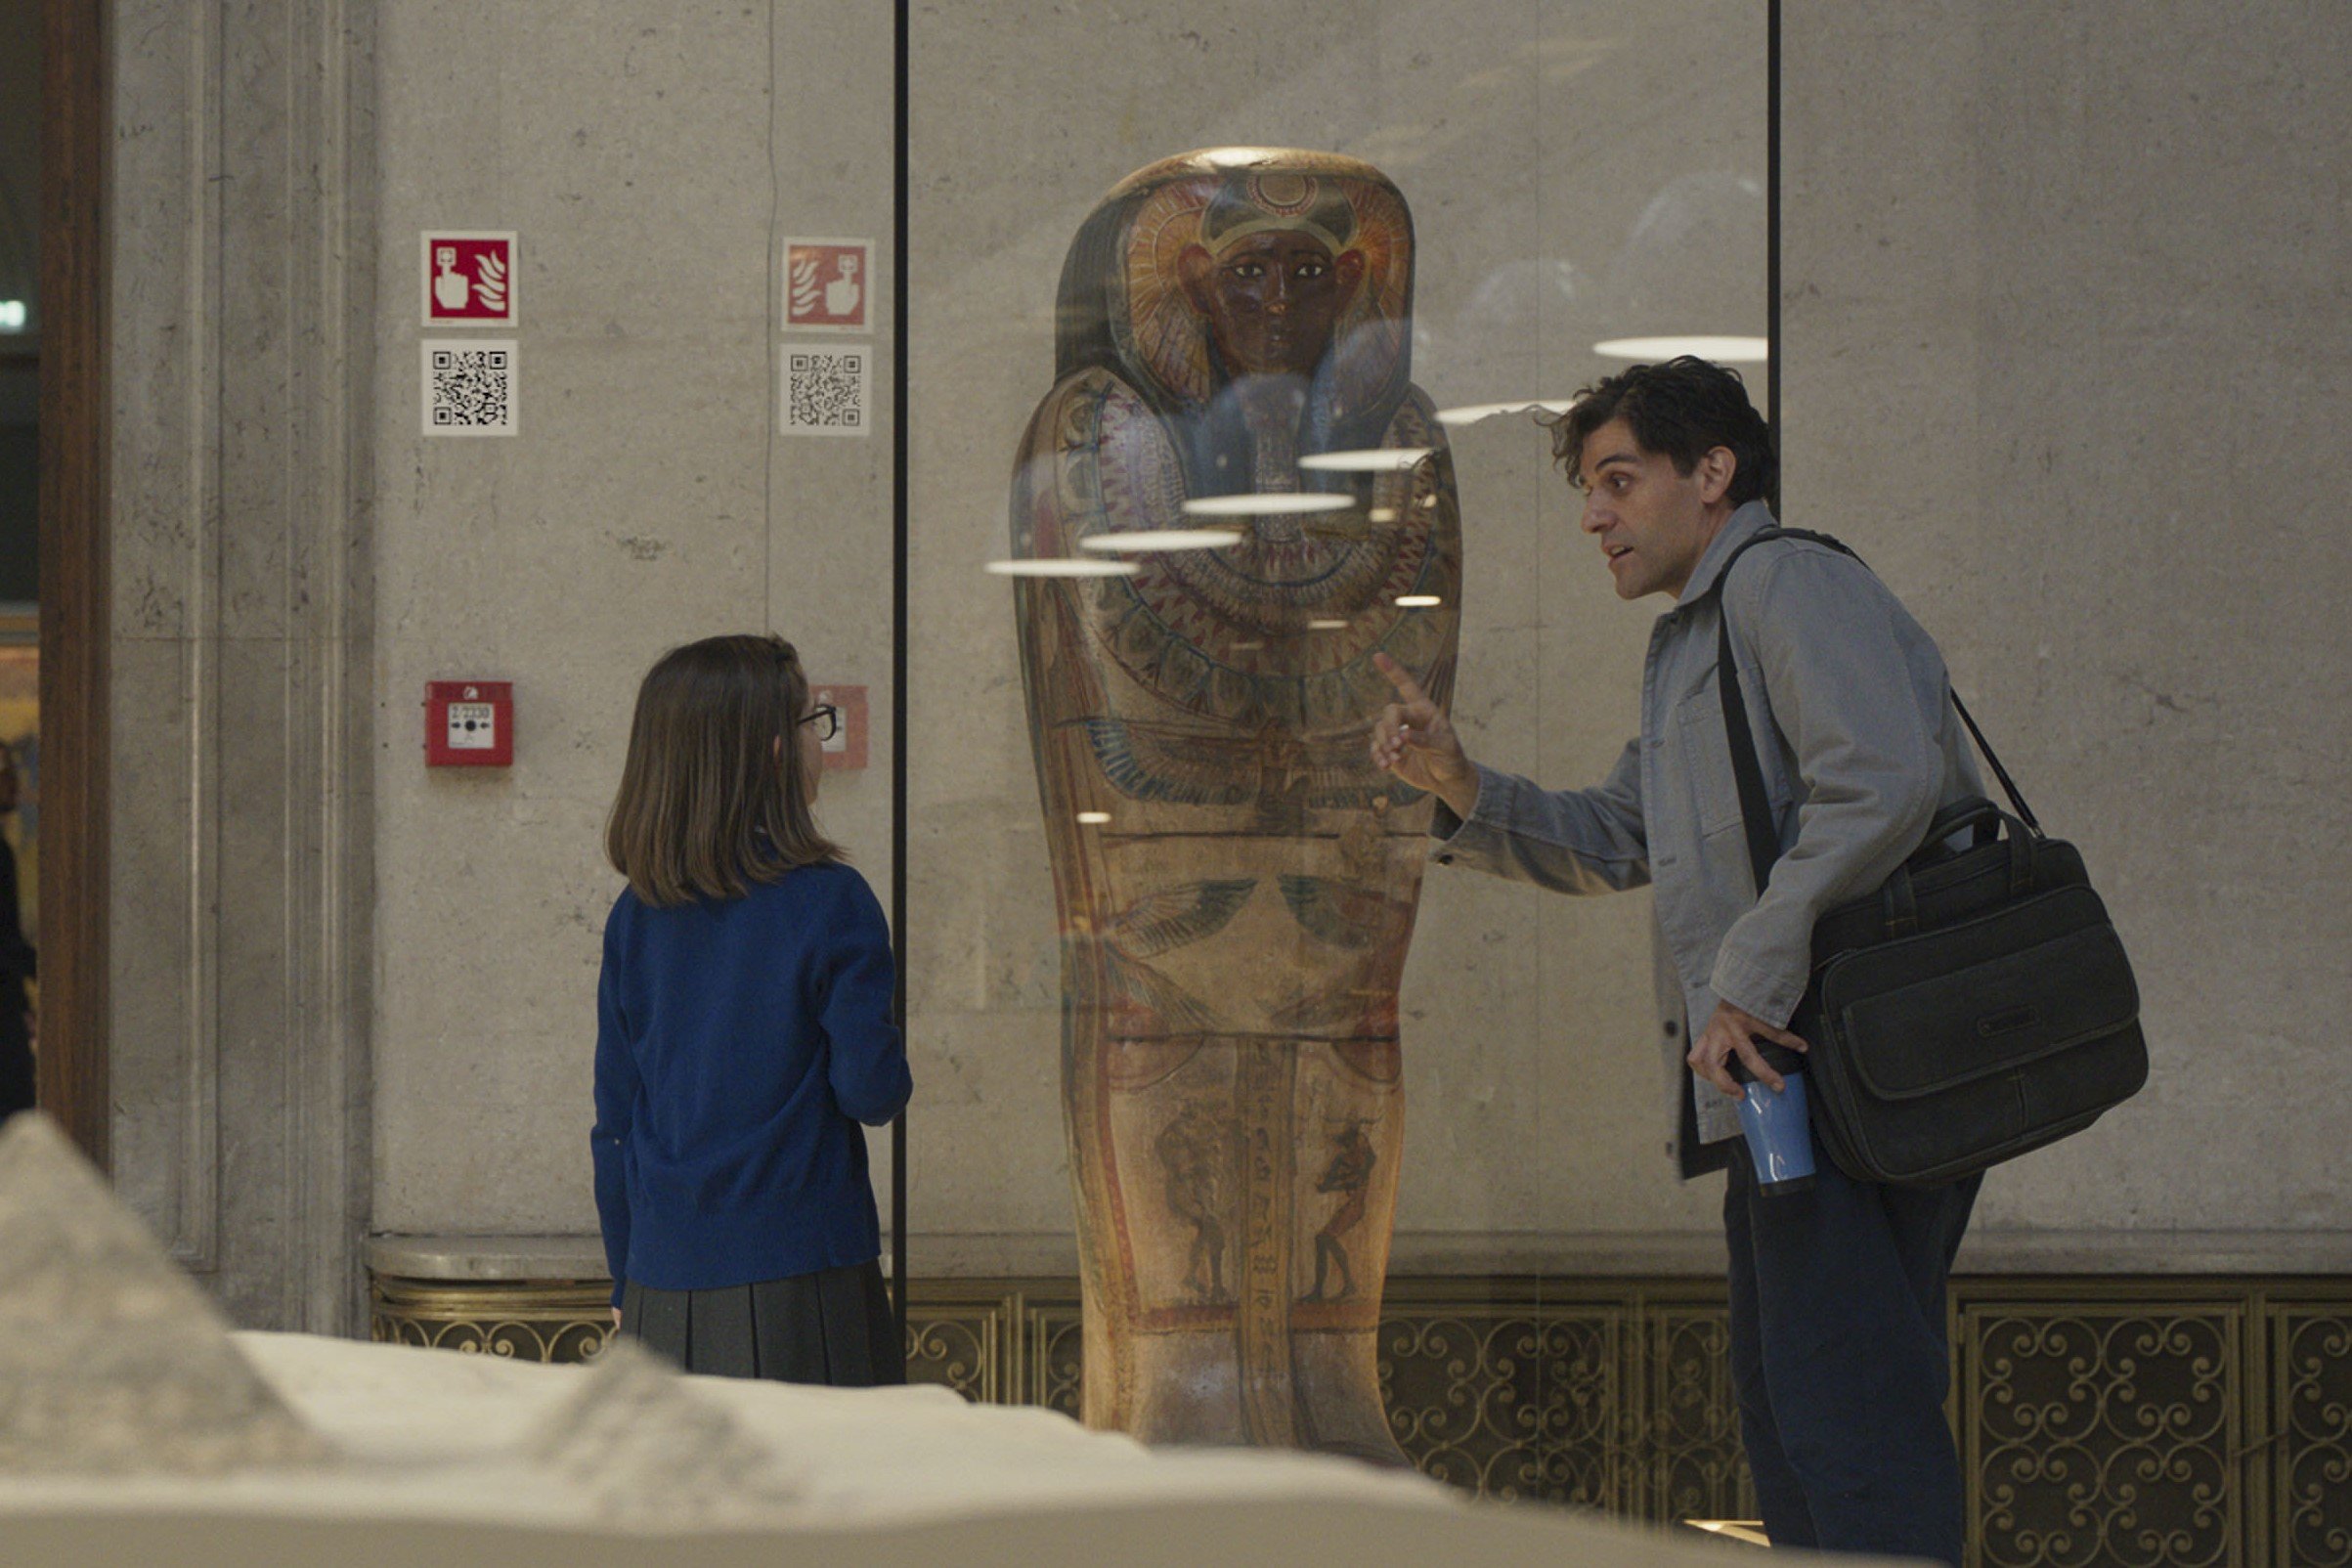 Oscar Isaac, in character as Steven Grant, shares a scene with a young girl in 'Moon Knight' Episode 1, which features an Easter egg. They stand in front of a sarcophagus. The girl wears a blue sweater and a gray skirt. Steven wears a gray jacket and blue pants, and has a black bag slung over his shoulder.